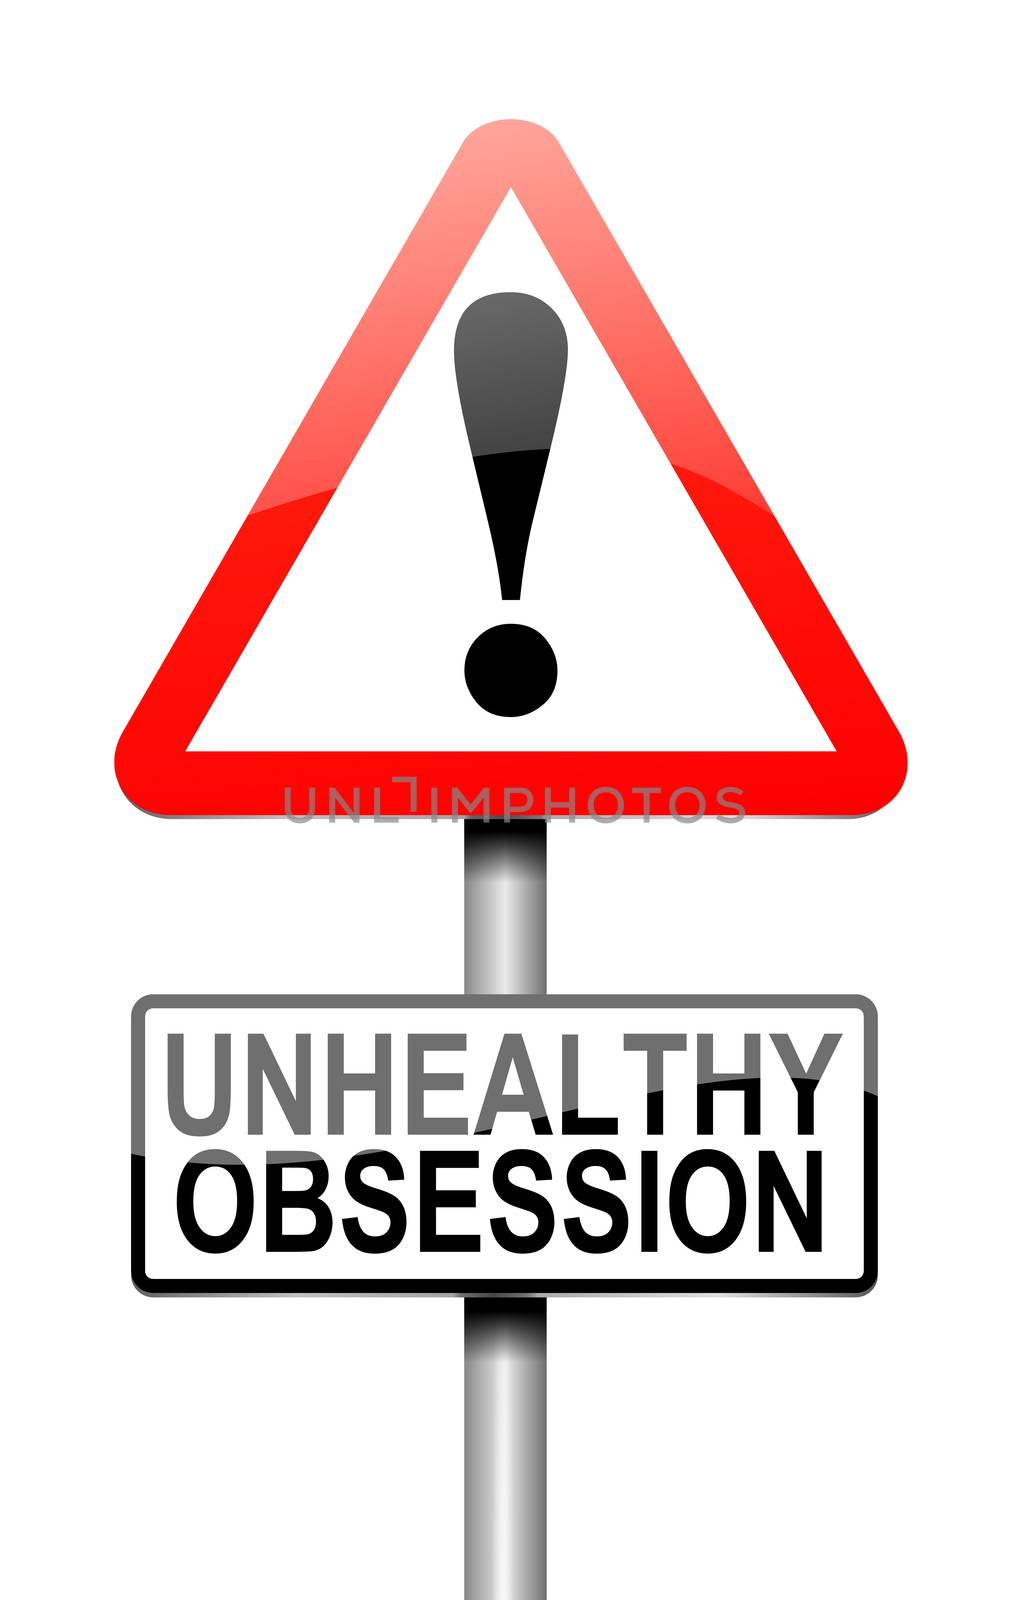 Illustration depicting a sign with an unhealthy obsession concept.